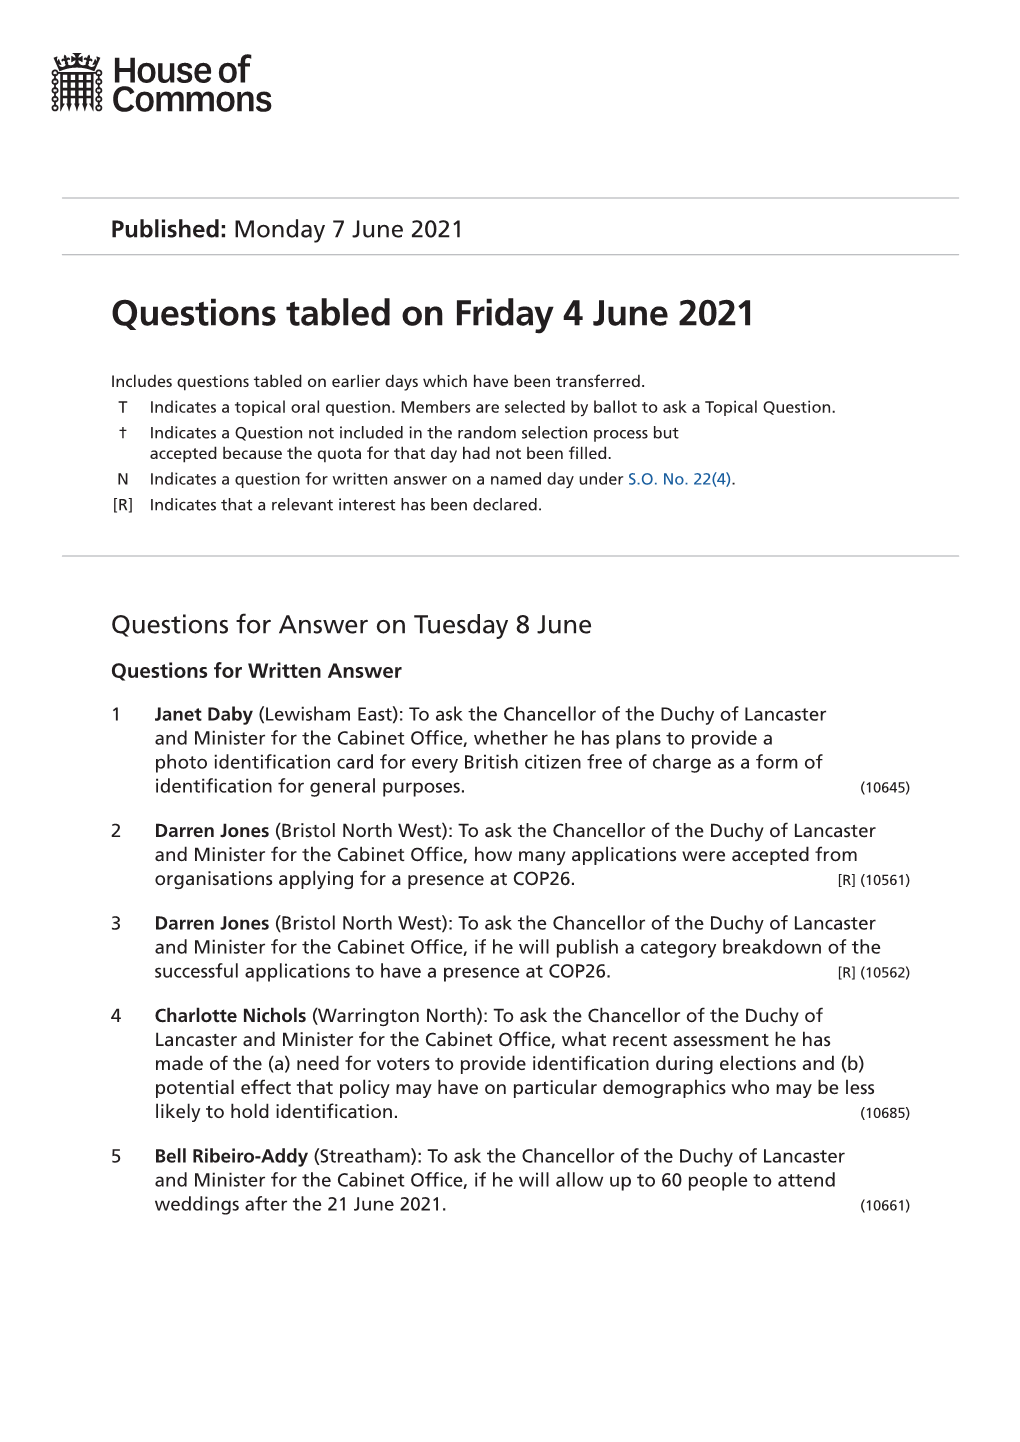 Questions Tabled on Friday 4 June 2021